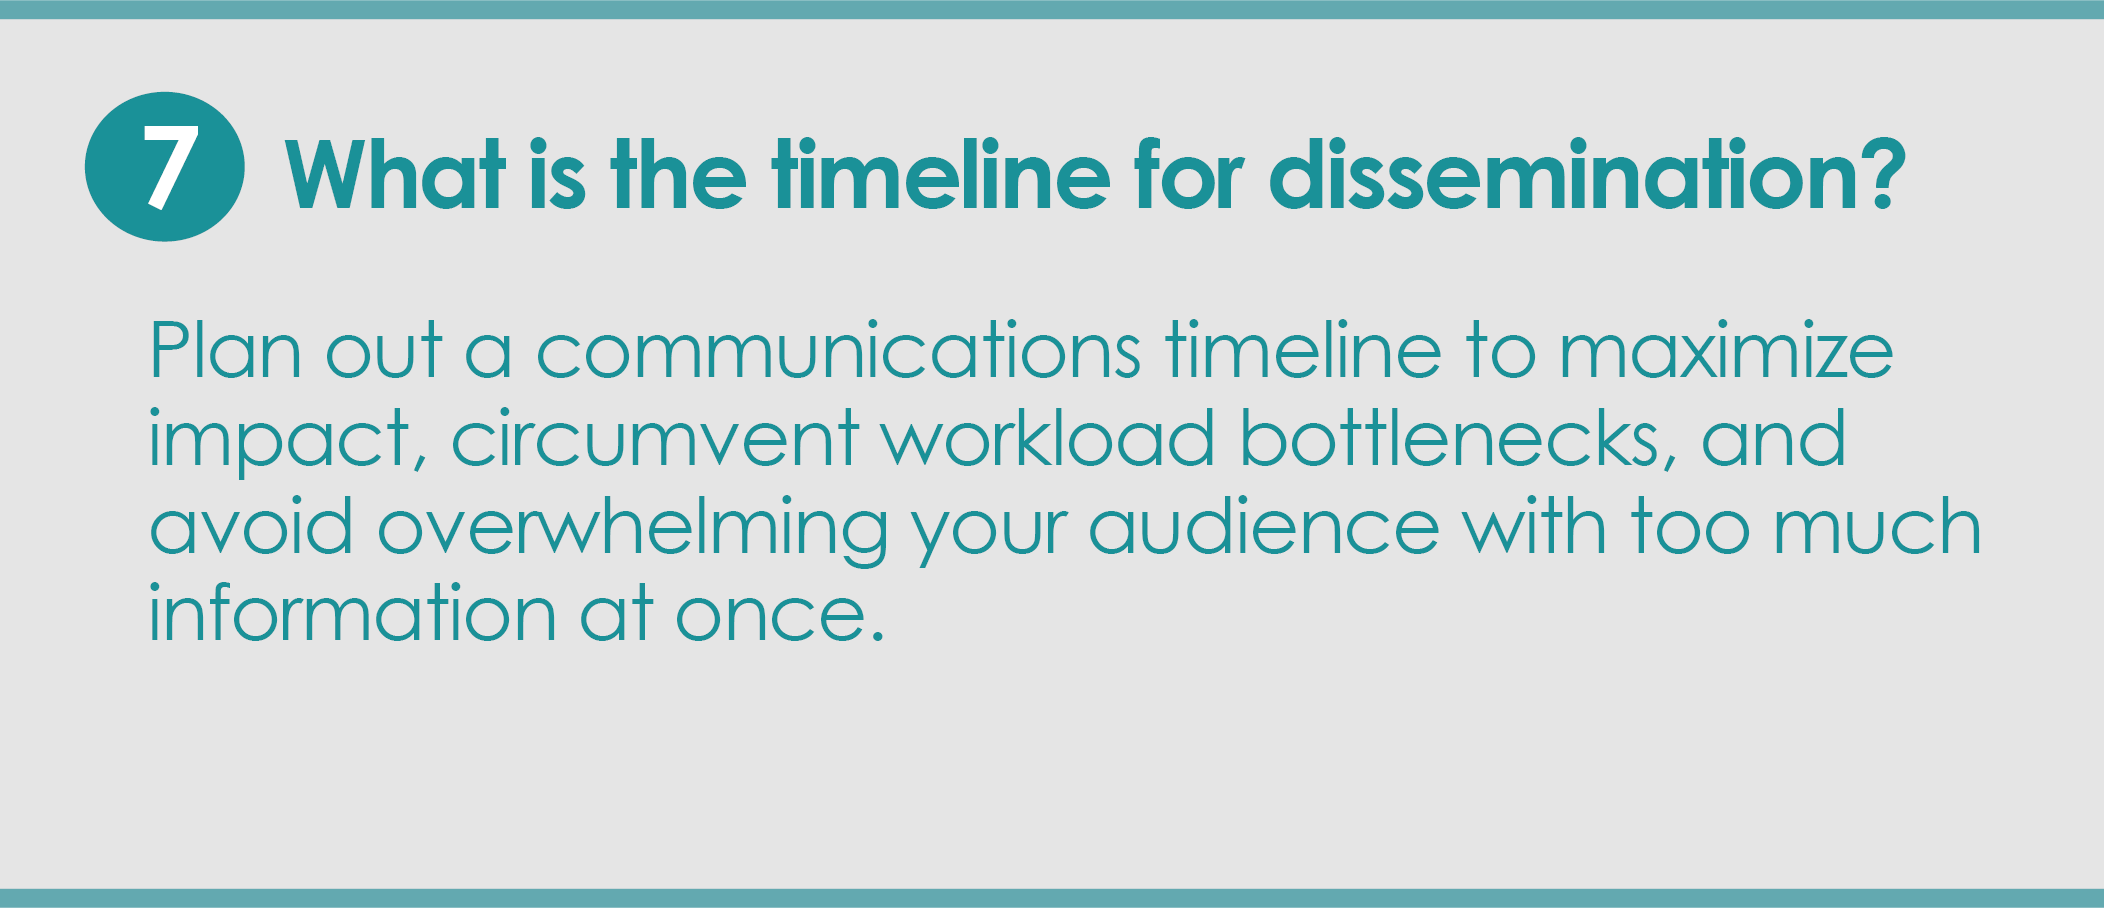 Step 7: What is the timeline for dissemination? Plan out a communications timeline to maximize impact, circumvent workload bottlenecks, and avoid overwhelming your audience with too much information at once.